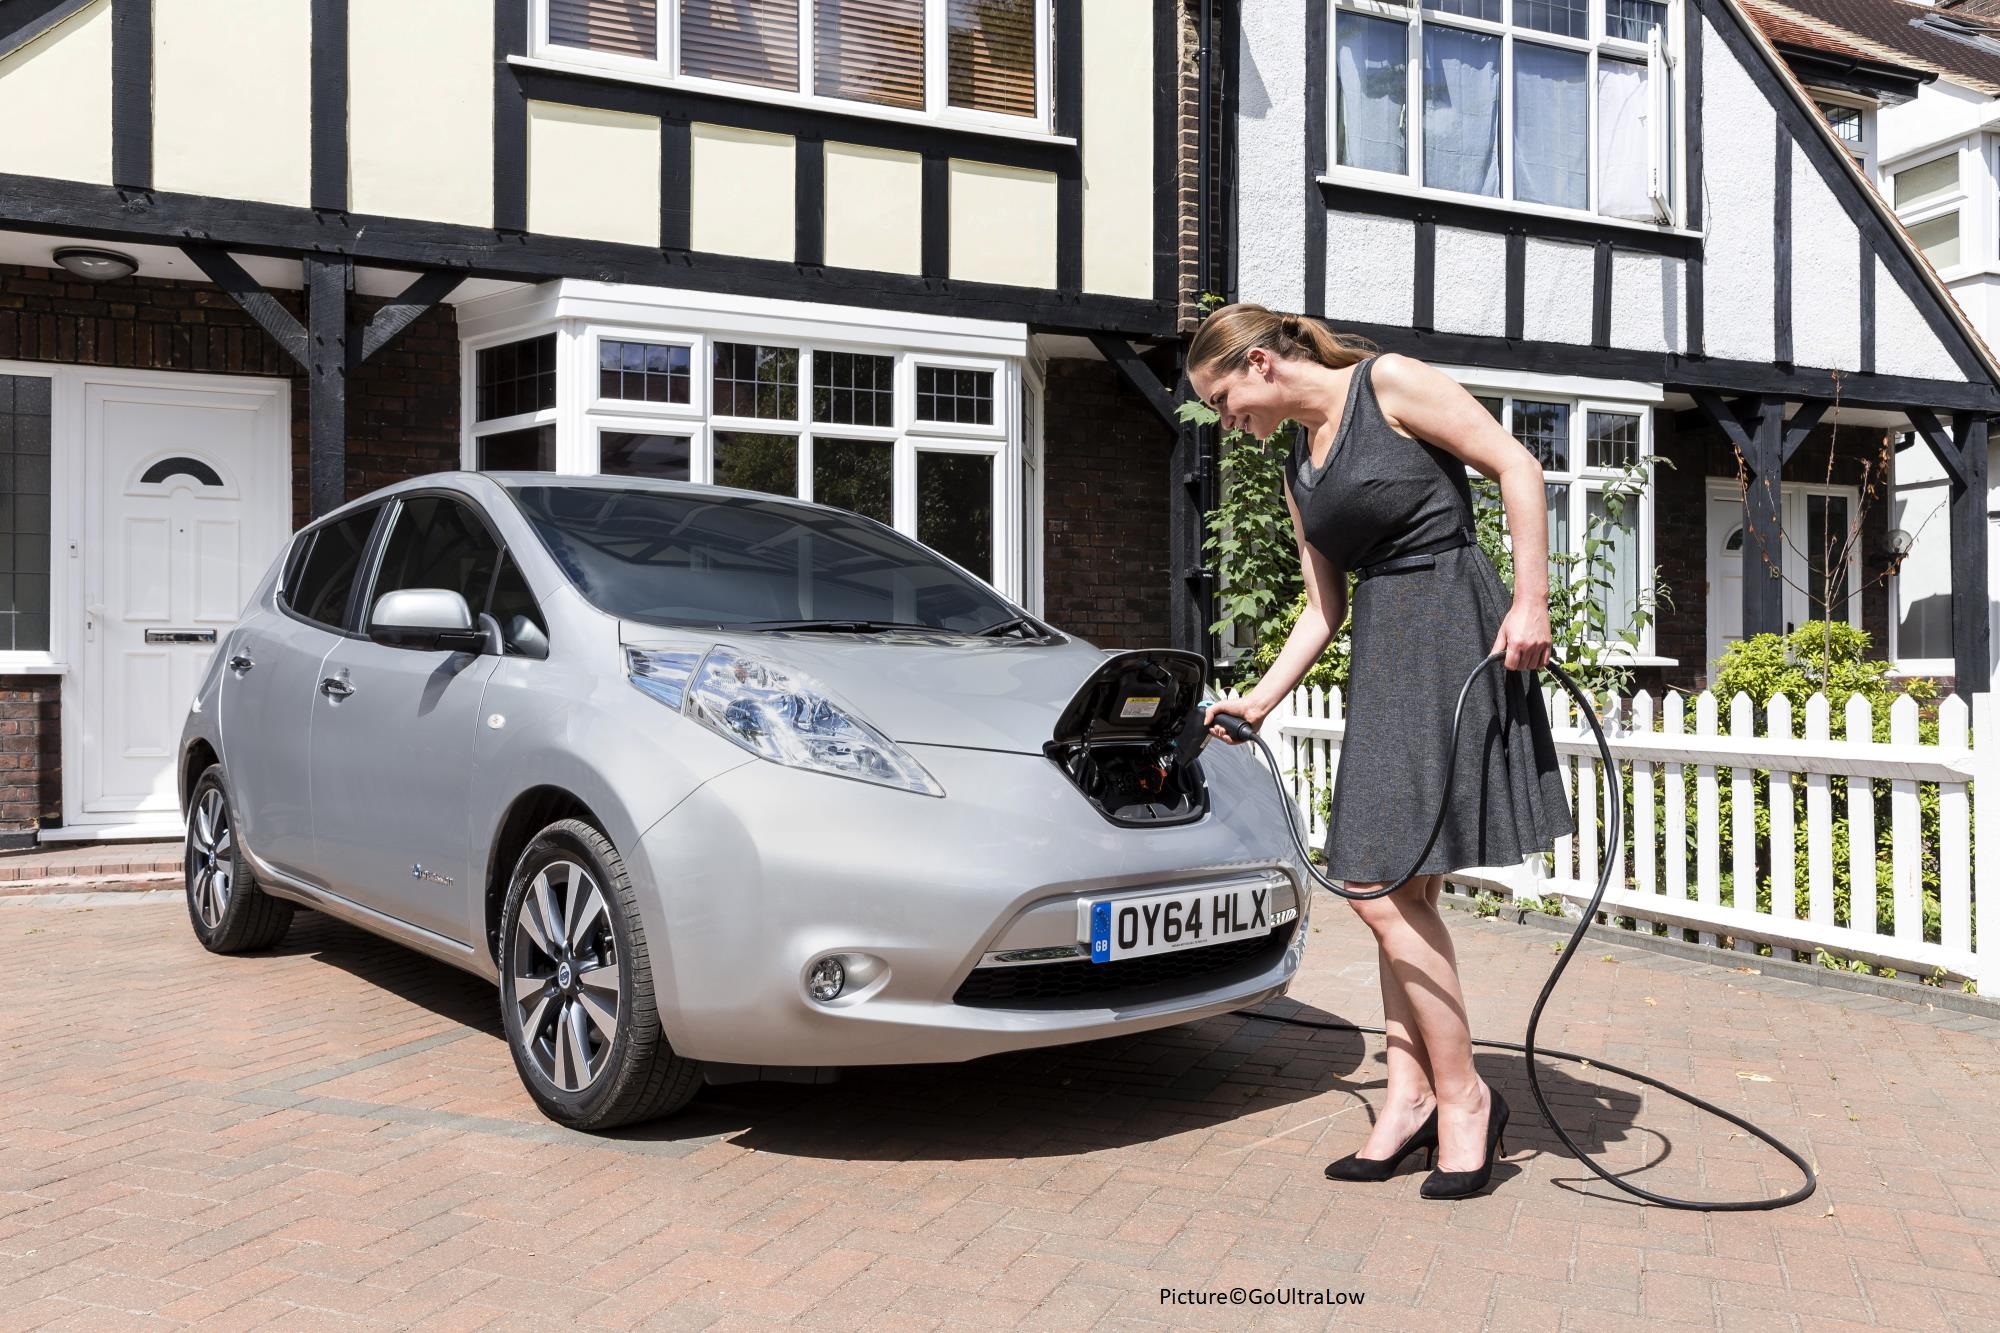 Are electric car charging cables really being stolen? - Ask the Car Expert